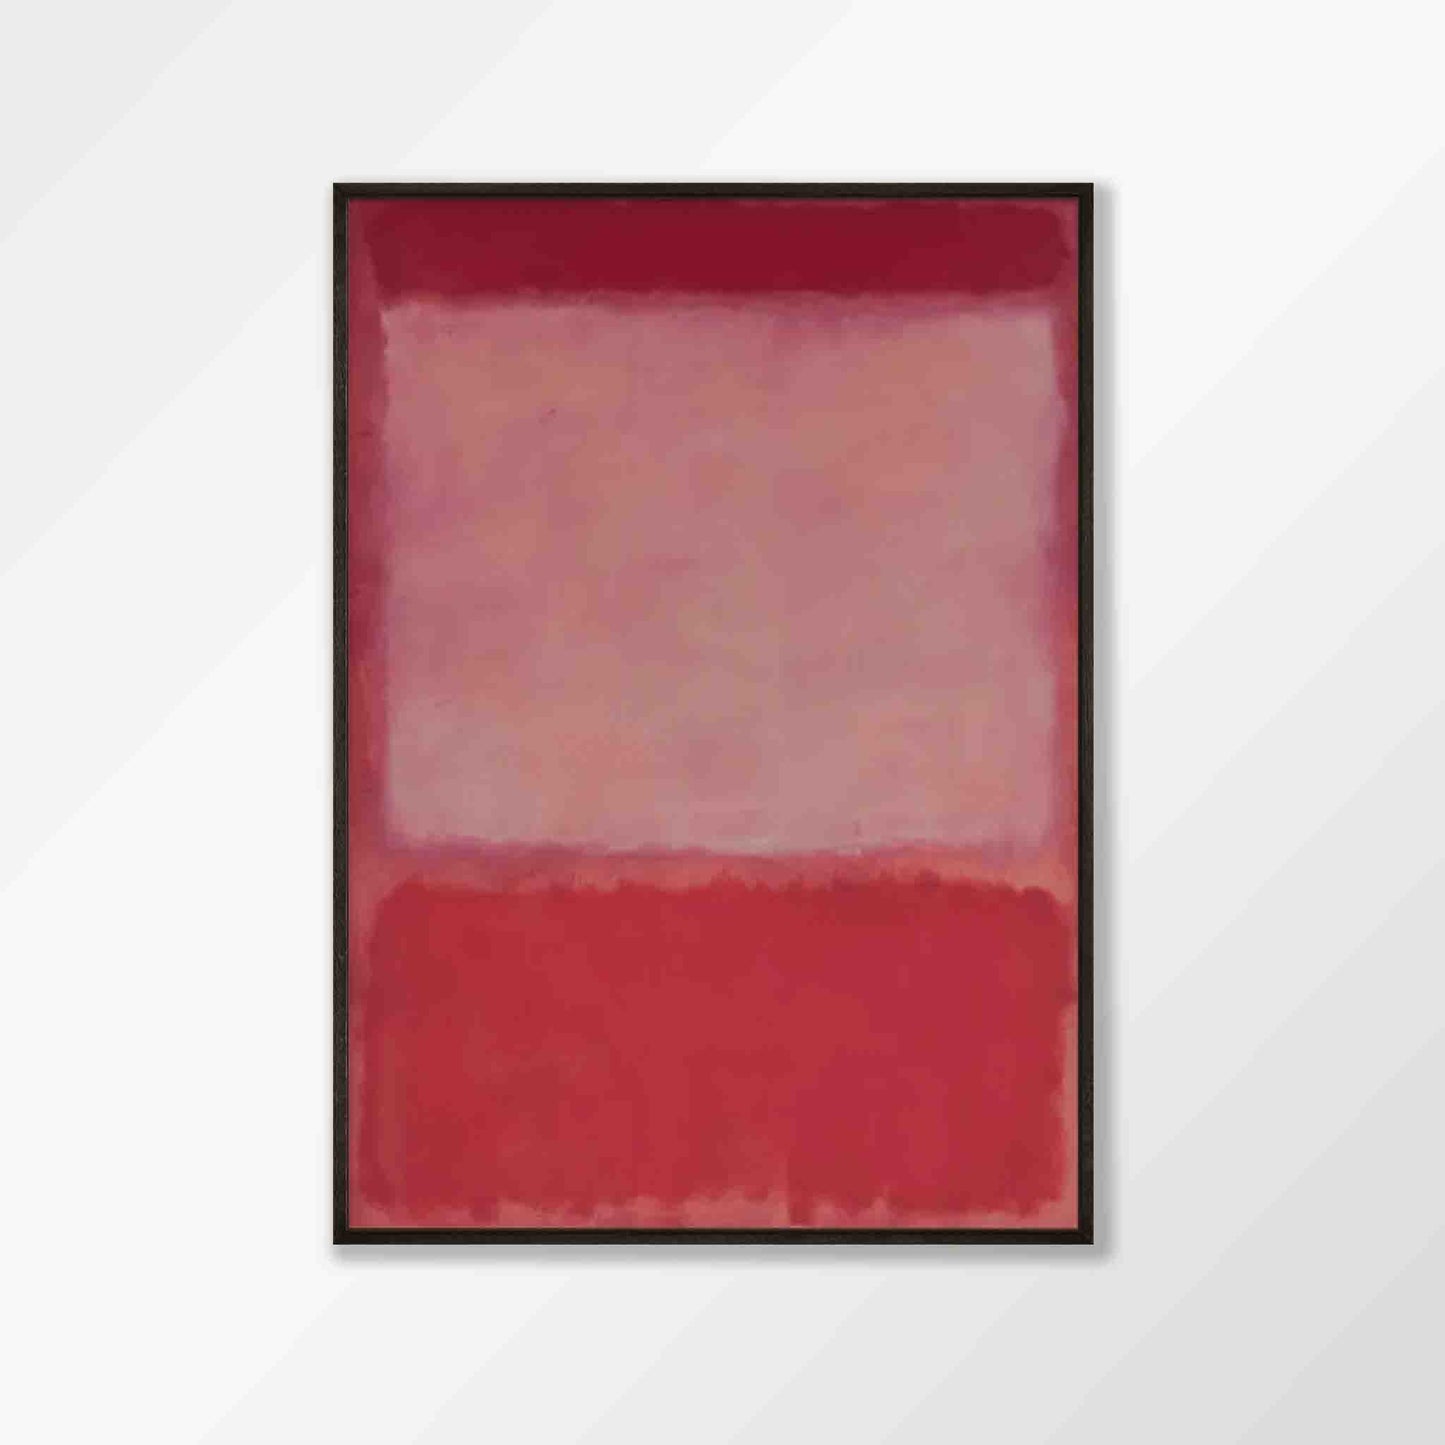 White Over Red by Mark Rothko